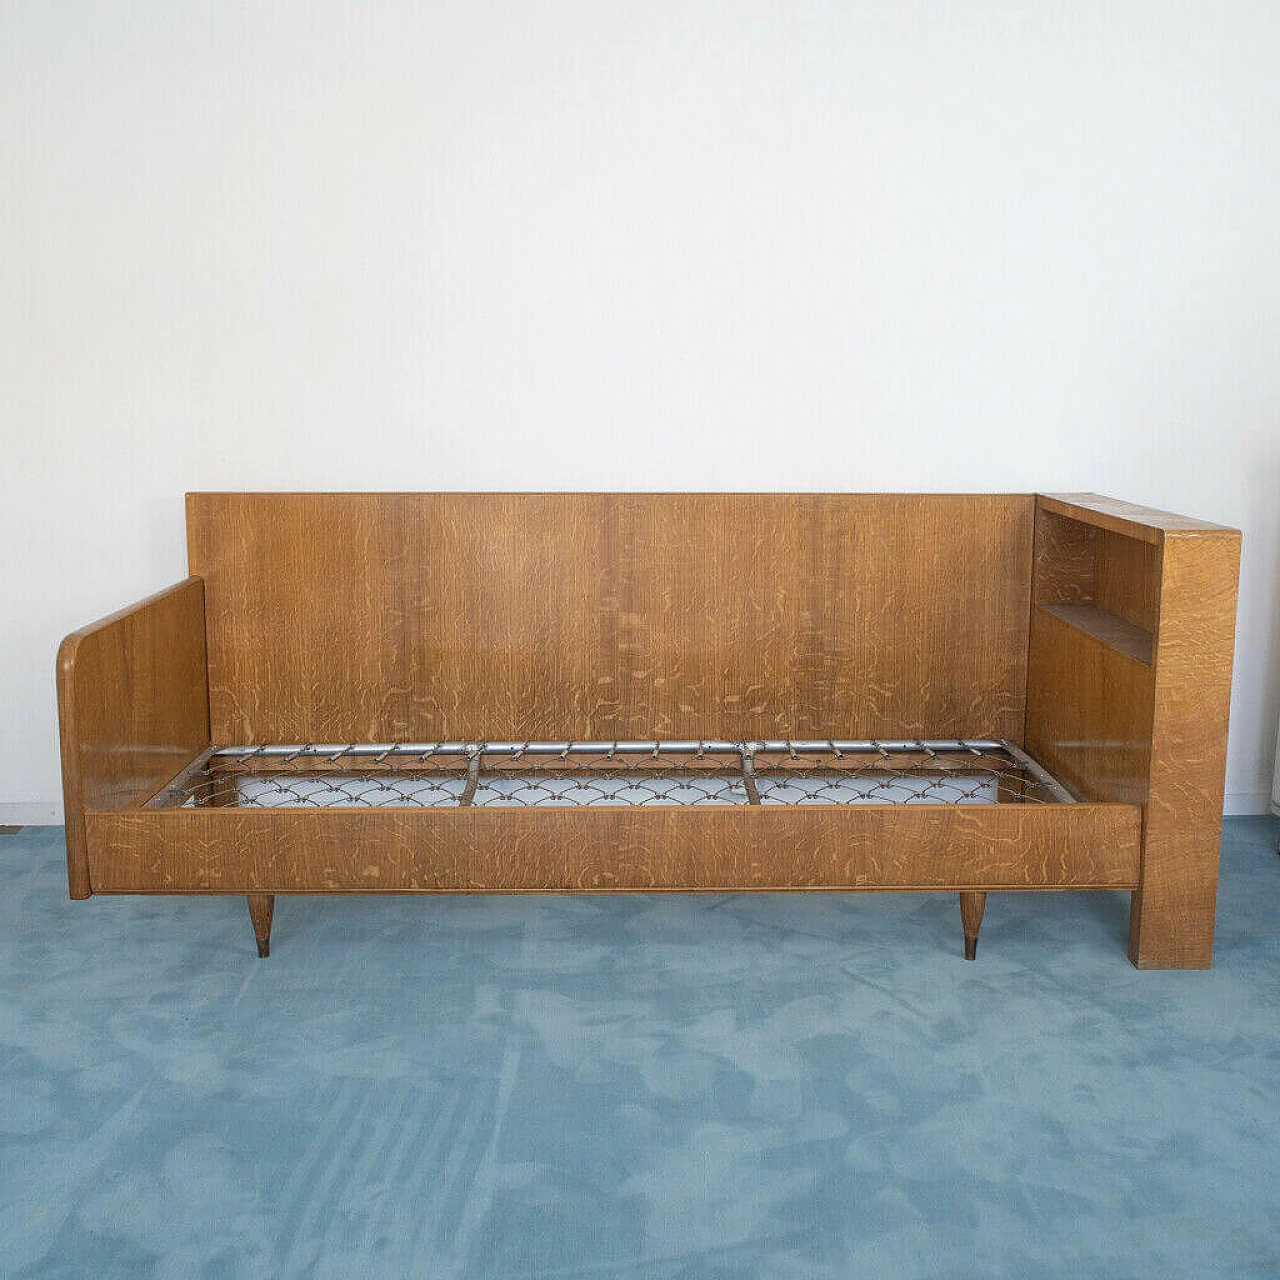 Single bed in wood and brass, 1950's 1156289